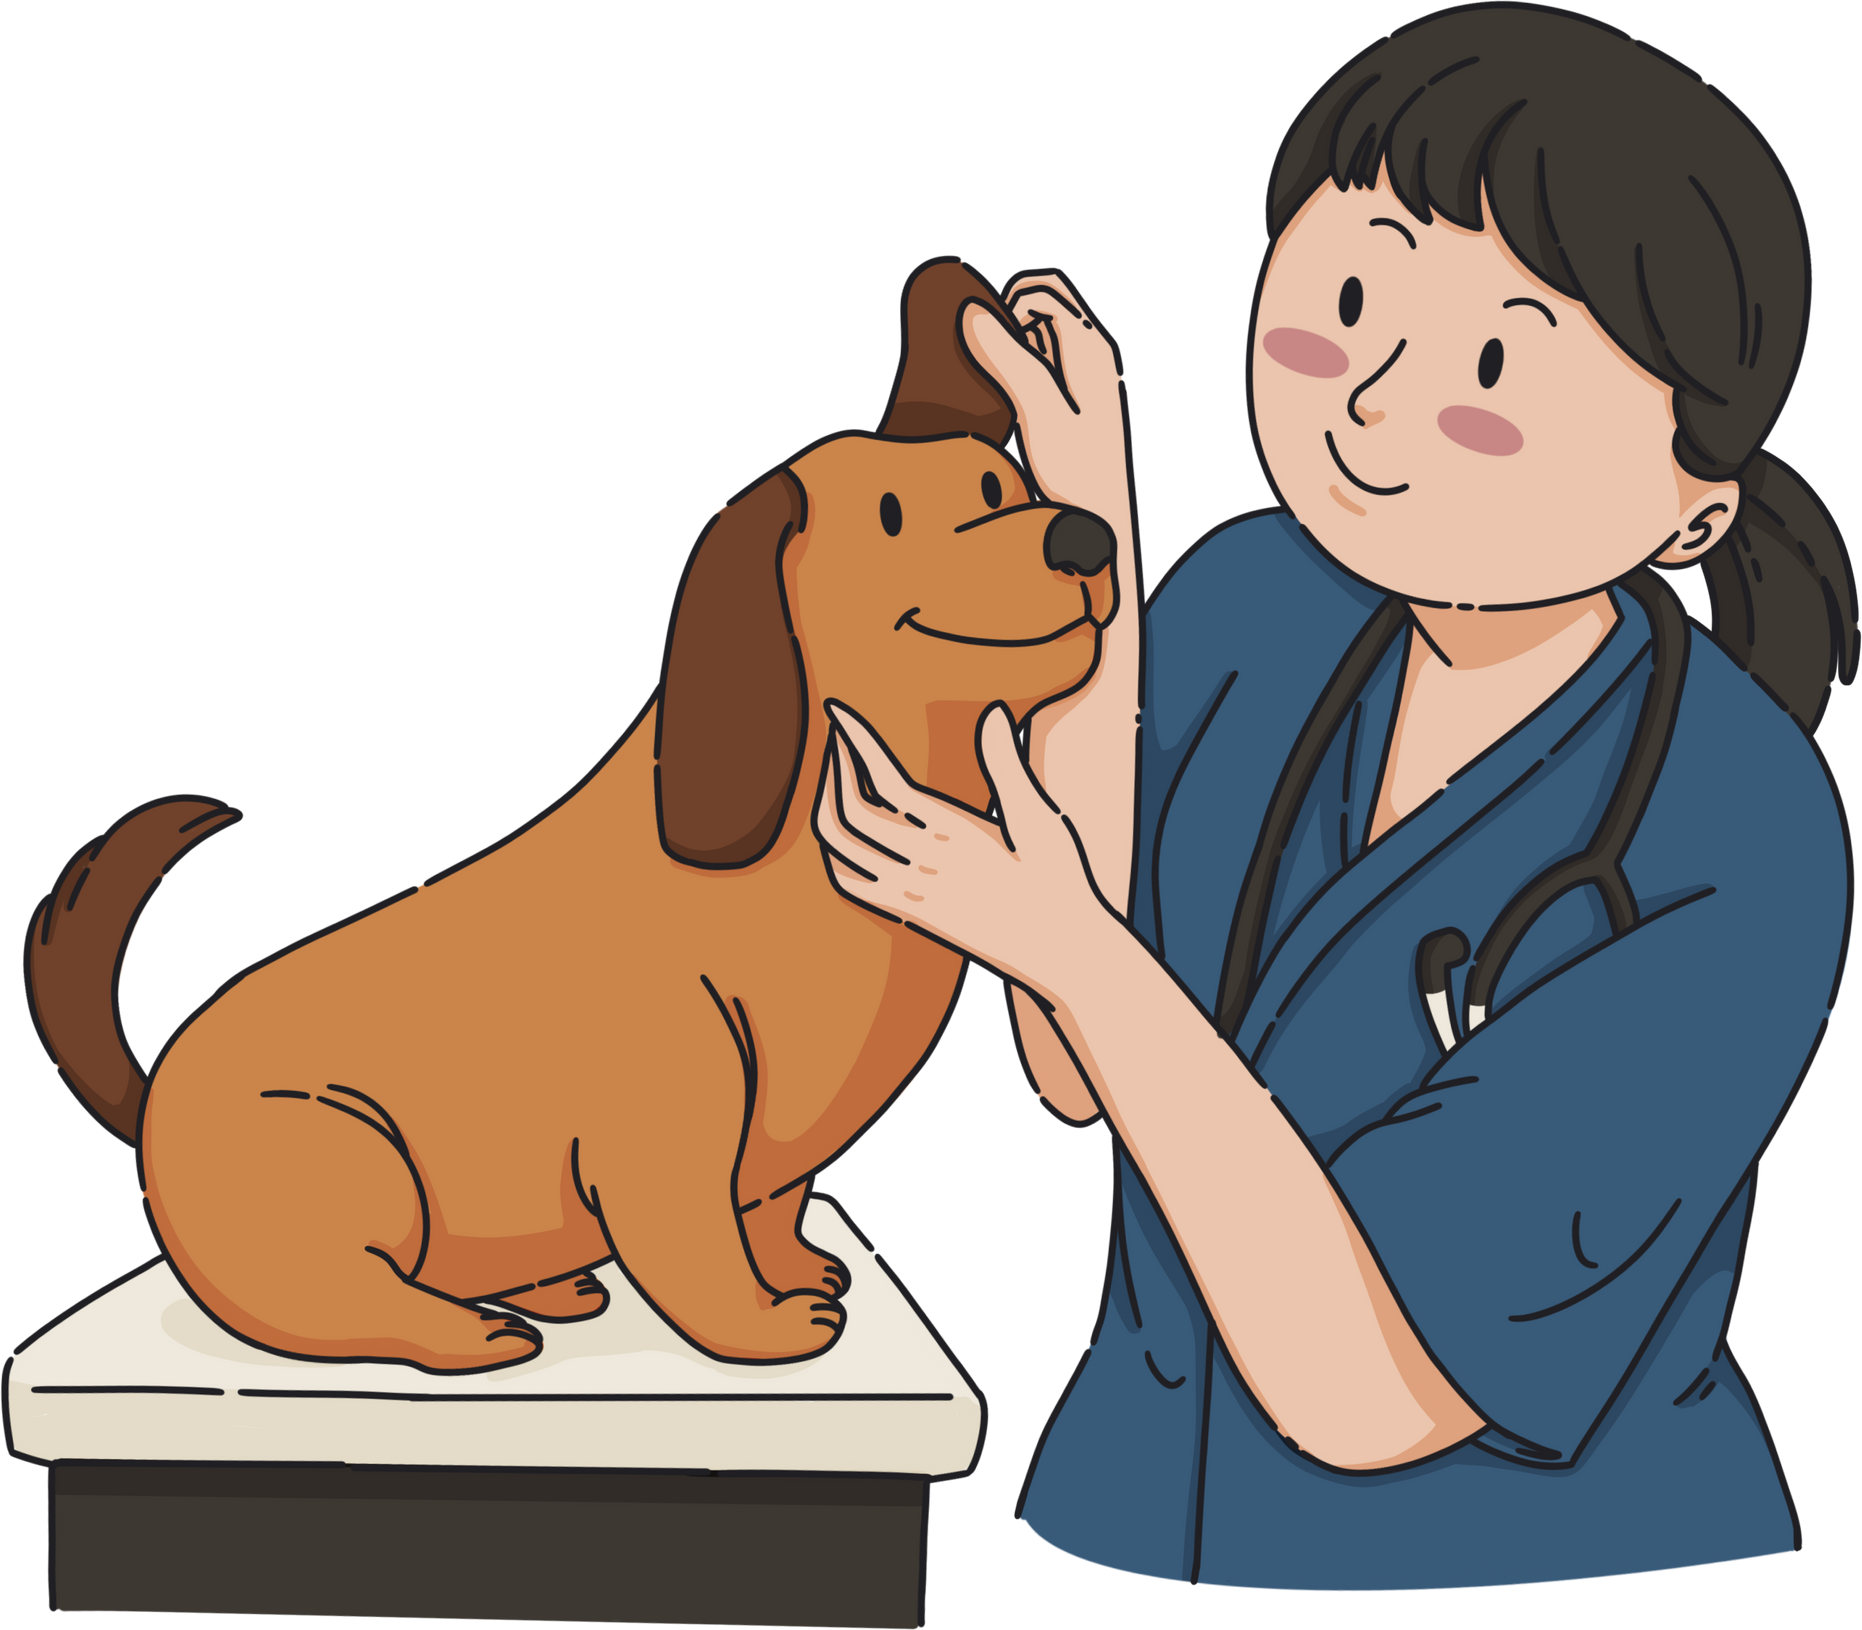 Friendly Veterinarian Doctor Check-up Brown Dog Clean Flat Design Illustration style